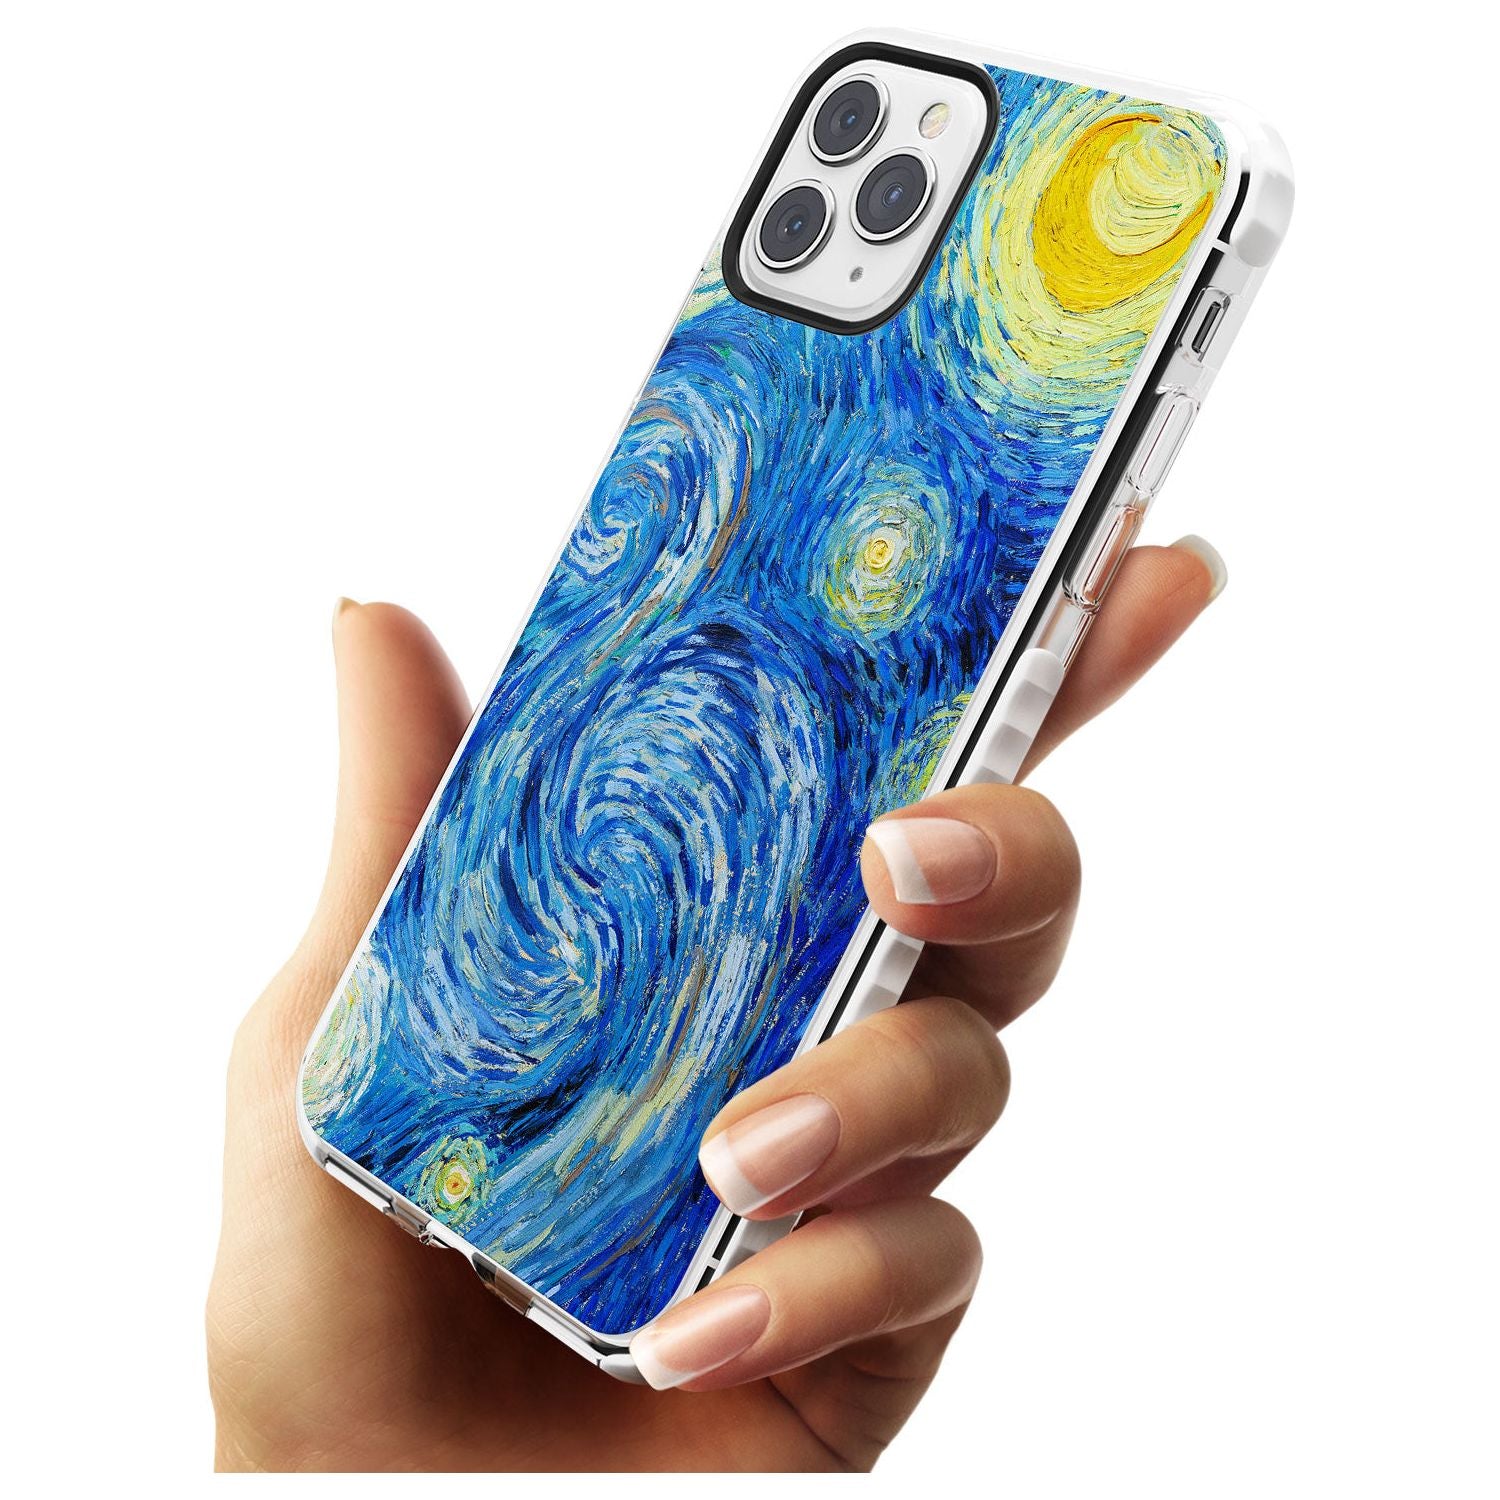 The Starry Night by Vincent Van Gogh Slim TPU Phone Case for iPhone 11 Pro Max